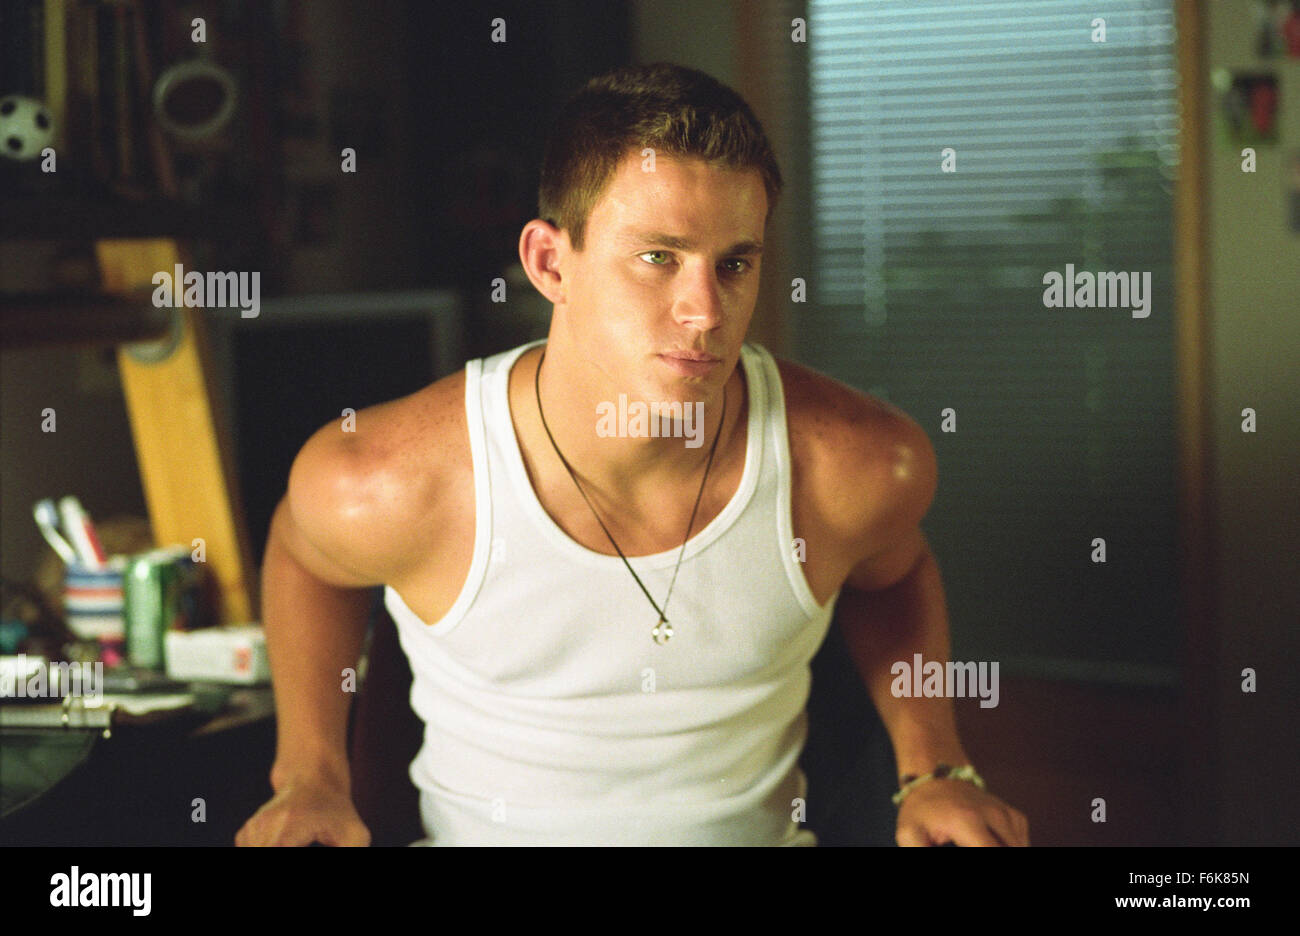 RELEASE DATE: March 17, 2006. MOVIE TITLE: She's the Man. STUDIO: DreamWorks. PLOT: When her brother decides to ditch for a couple weeks in London, Viola heads over to his elite boarding school, disguises herself as him, and proceeds to fall for one of her soccer teammates. PICTURED: CHANNING TATUM as Duke. Stock Photo